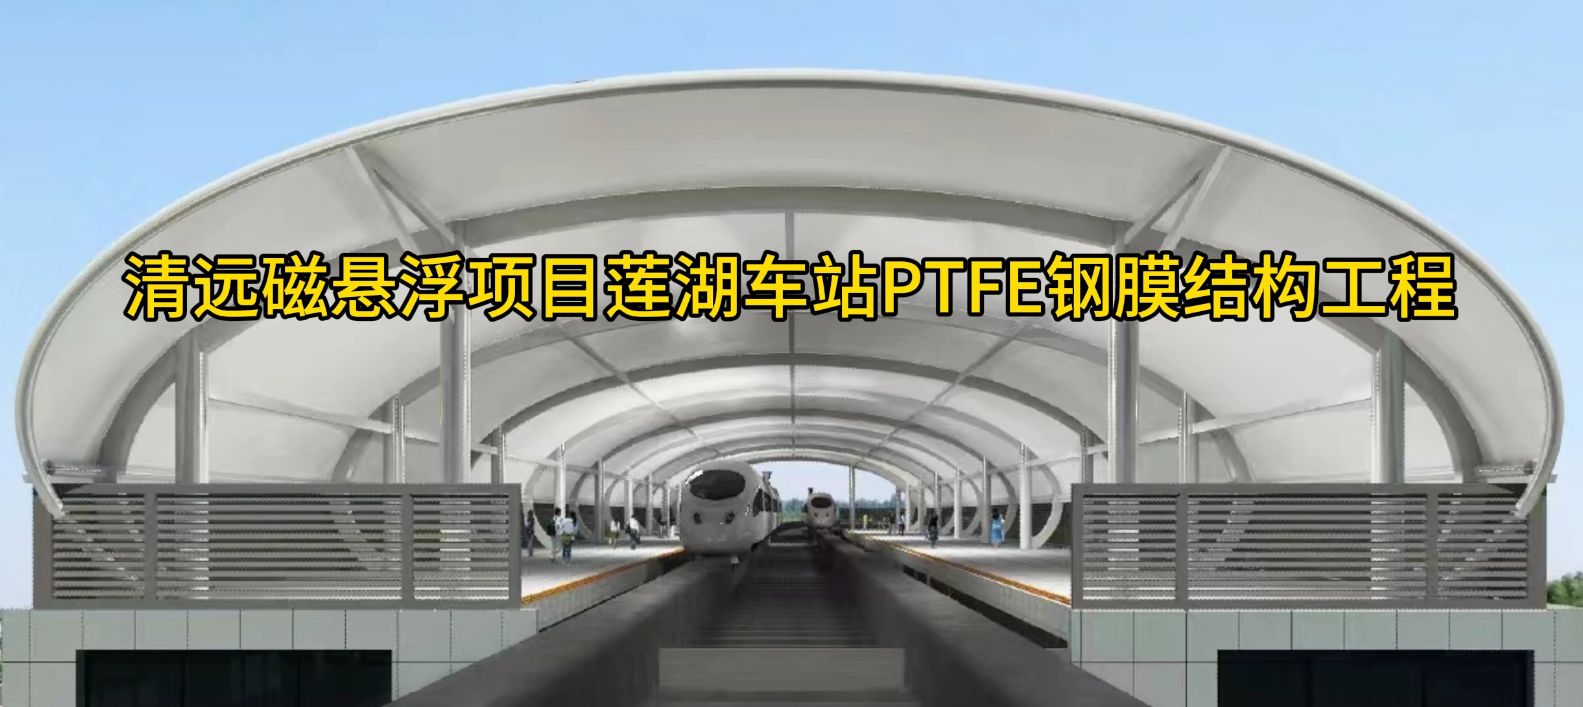 PTFE steel membrane structure of Lianhu station of Qingyuan Maglev project